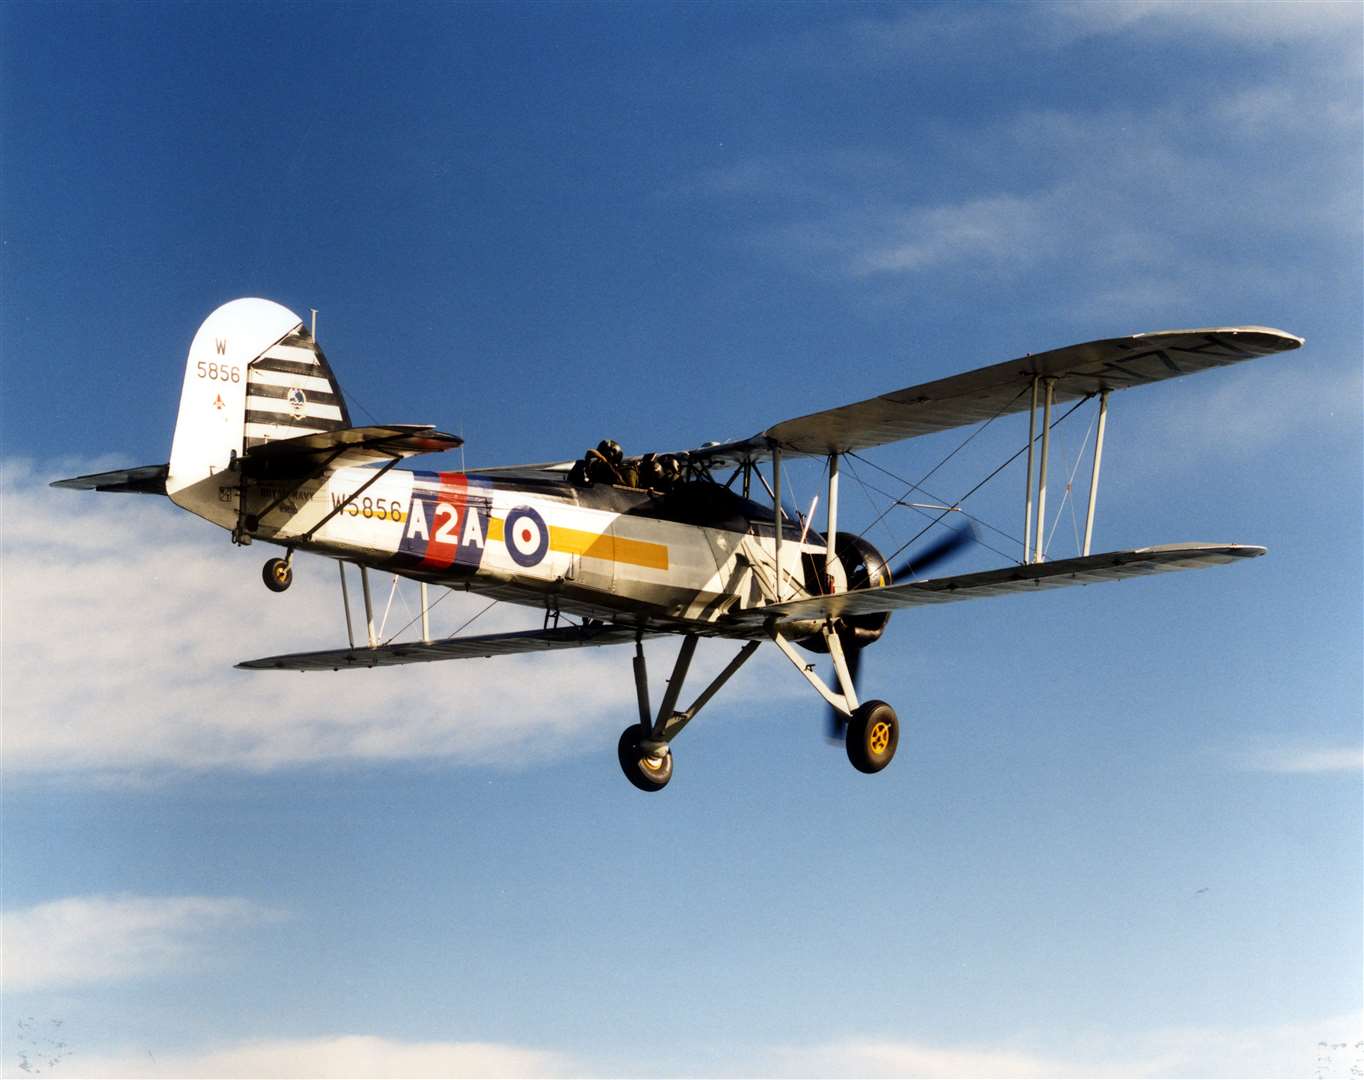 The Royal Navy's Fairey Swordfish were expecting back up of five RAF Spitfire squadrons, but only one arrived